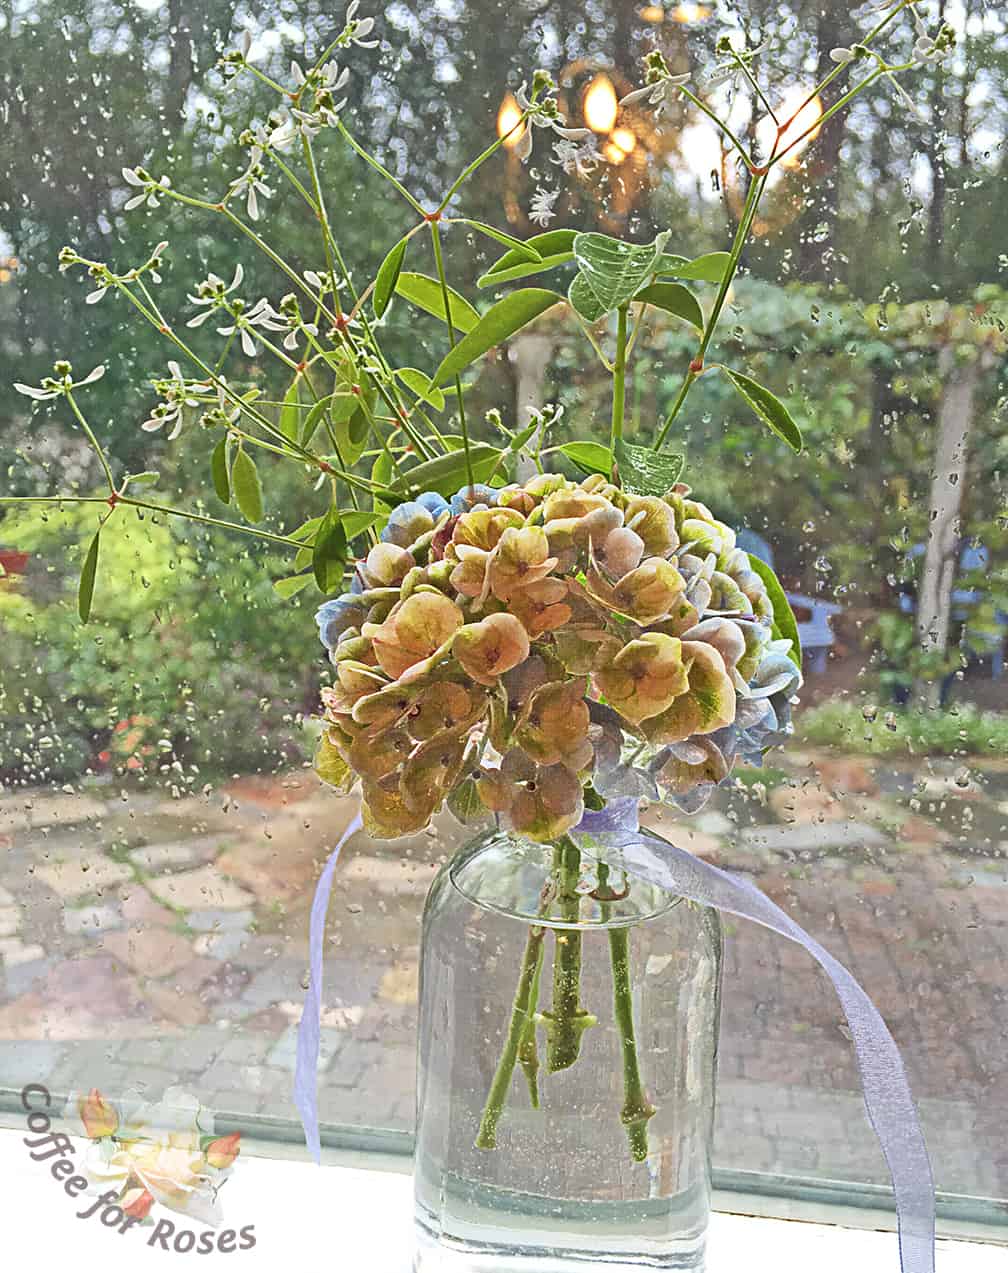 A simple bouquet for every one of the kitchen windows today. A flower from the lovely Everlasting Harmony Hydrangea, with a few sprigs of Diamond Frost Euphorbia. 